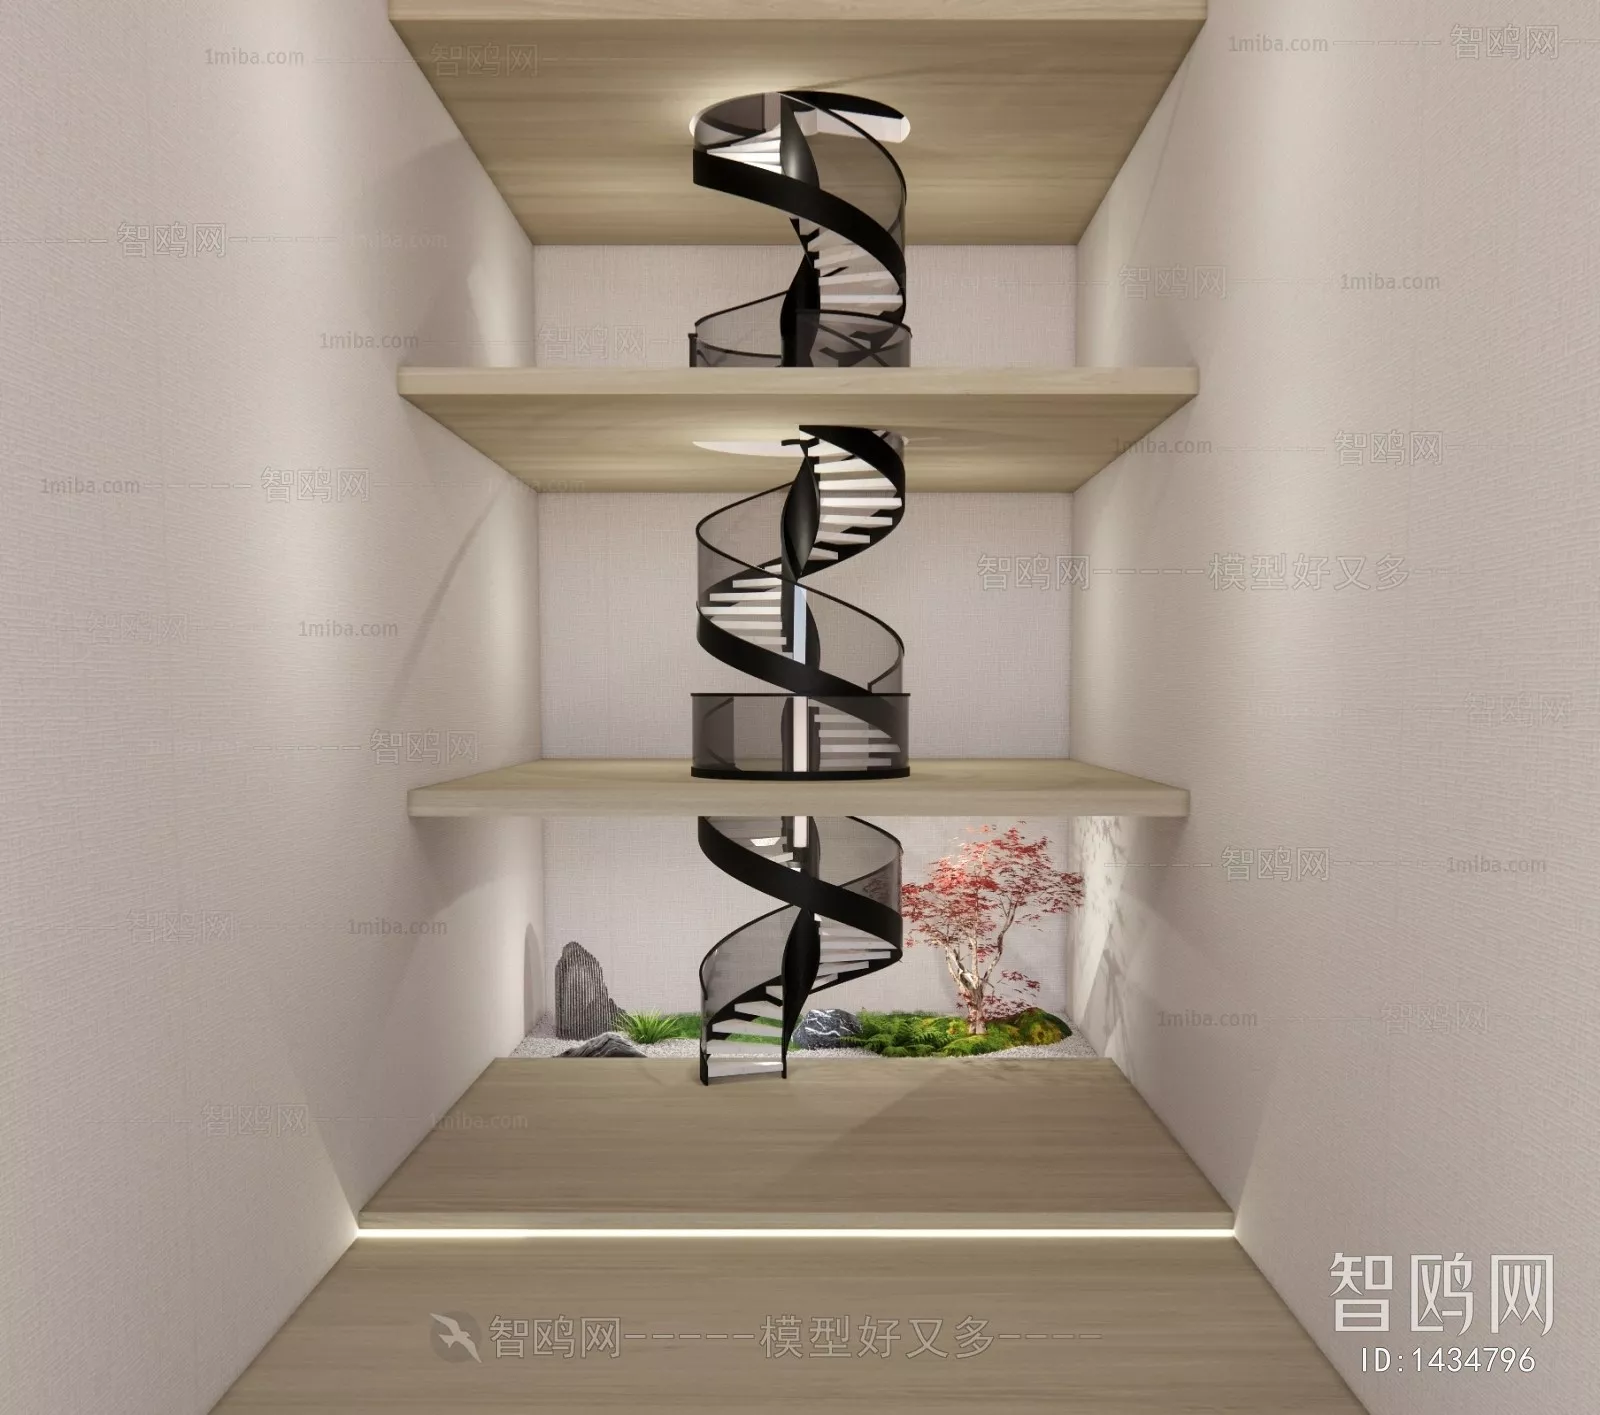 MODERN STAIR - SKETCHUP 3D MODEL - VRAY OR ENSCAPE - ID14320